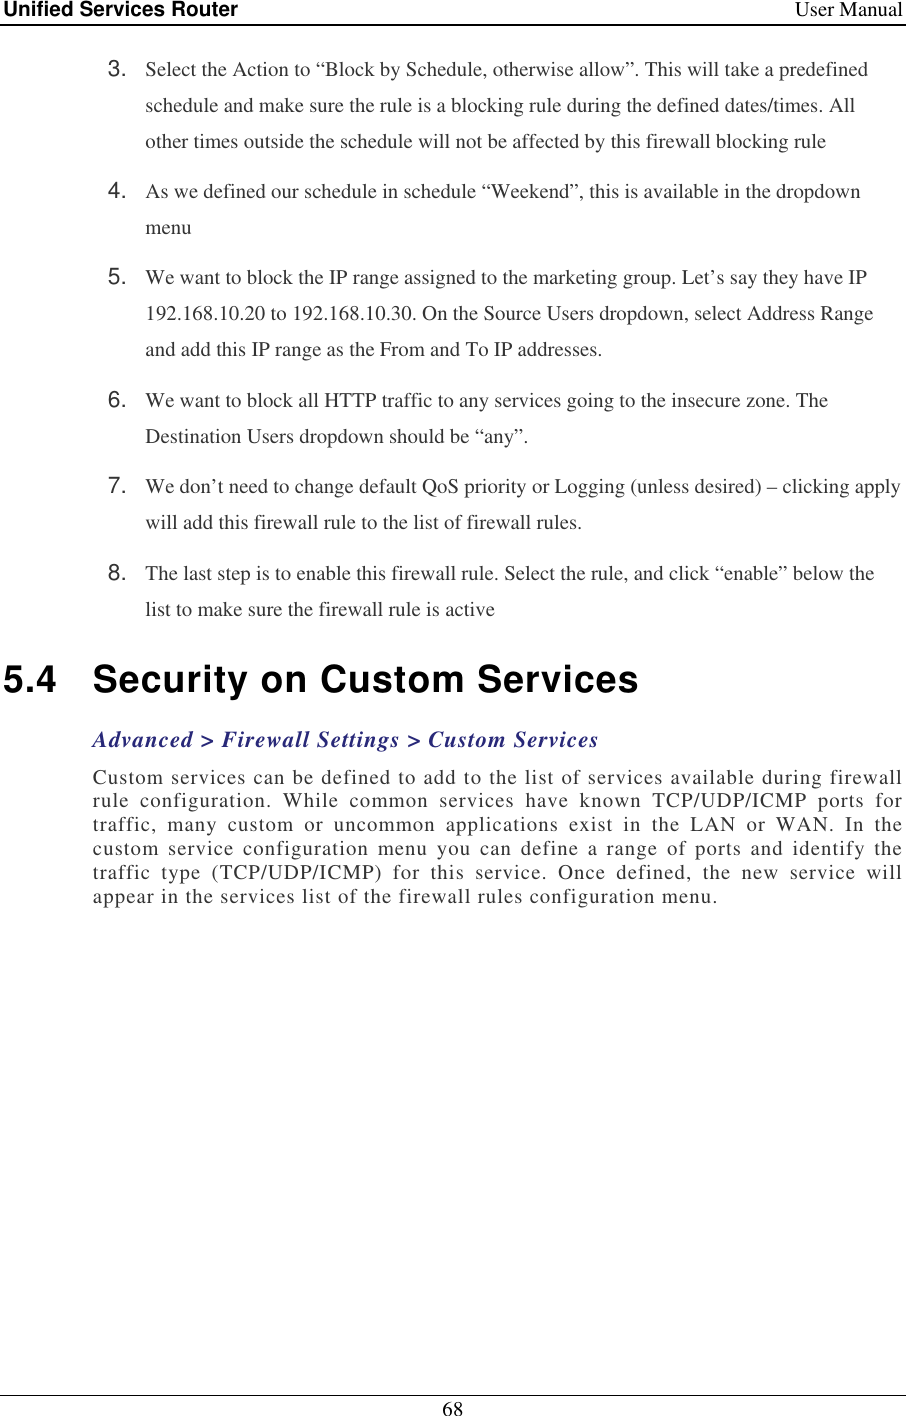 Unified Services Router    User Manual 68  3.  Select the Action to “Block by Schedule, otherwise allow”. This will take a predefined schedule and make sure the rule is a blocking rule during the defined dates/times. All other times outside the schedule will not be affected by this firewall blocking rule 4.  As we defined our schedule in schedule “Weekend”, this is available in the dropdown menu  5.  We want to block the IP range assigned to the marketing group. Let’s say they have IP 192.168.10.20 to 192.168.10.30. On the Source Users dropdown, select Address Range and add this IP range as the From and To IP addresses.  6.  We want to block all HTTP traffic to any services going to the insecure zone. The Destination Users dropdown should be “any”.  7.  We don’t need to change default QoS priority or Logging (unless desired) – clicking apply will add this firewall rule to the list of firewall rules.  8.  The last step is to enable this firewall rule. Select the rule, and click “enable” below the list to make sure the firewall rule is active 5.4  Security on Custom Services Advanced &gt; Firewall Settings &gt; Custom Services Custom services can be defined to add to the list of services available during firewall rule  configuration.  While  common  services  have  known  TCP/UDP/ICMP  ports  for traffic,  many  custom  or  uncommon  applications  exist  in  the  LAN  or  WAN.  In  the custom  service  configuration  menu  you  can  define  a  range  of  ports  and  identify  the traffic  type  (TCP/UDP/ICMP)  for  this  service.  Once  defined,  the  new  service  will appear in the services list of the firewall rules configuration menu.   